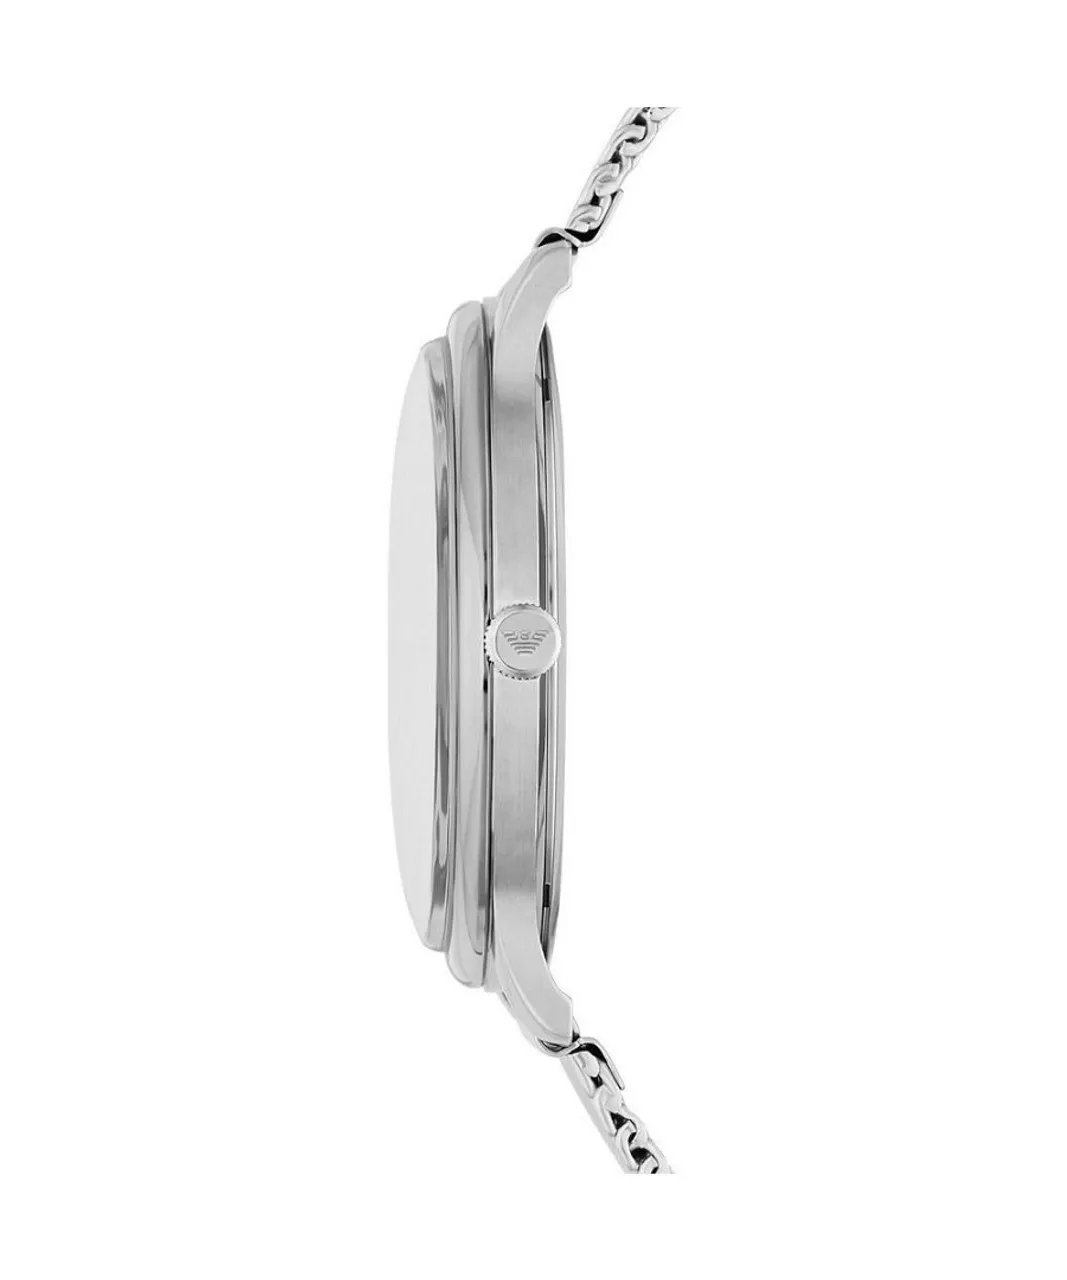 Emporio Armani Minimalist Mens Silver Watch AR11578 Stainless Steel (archived) - One Size